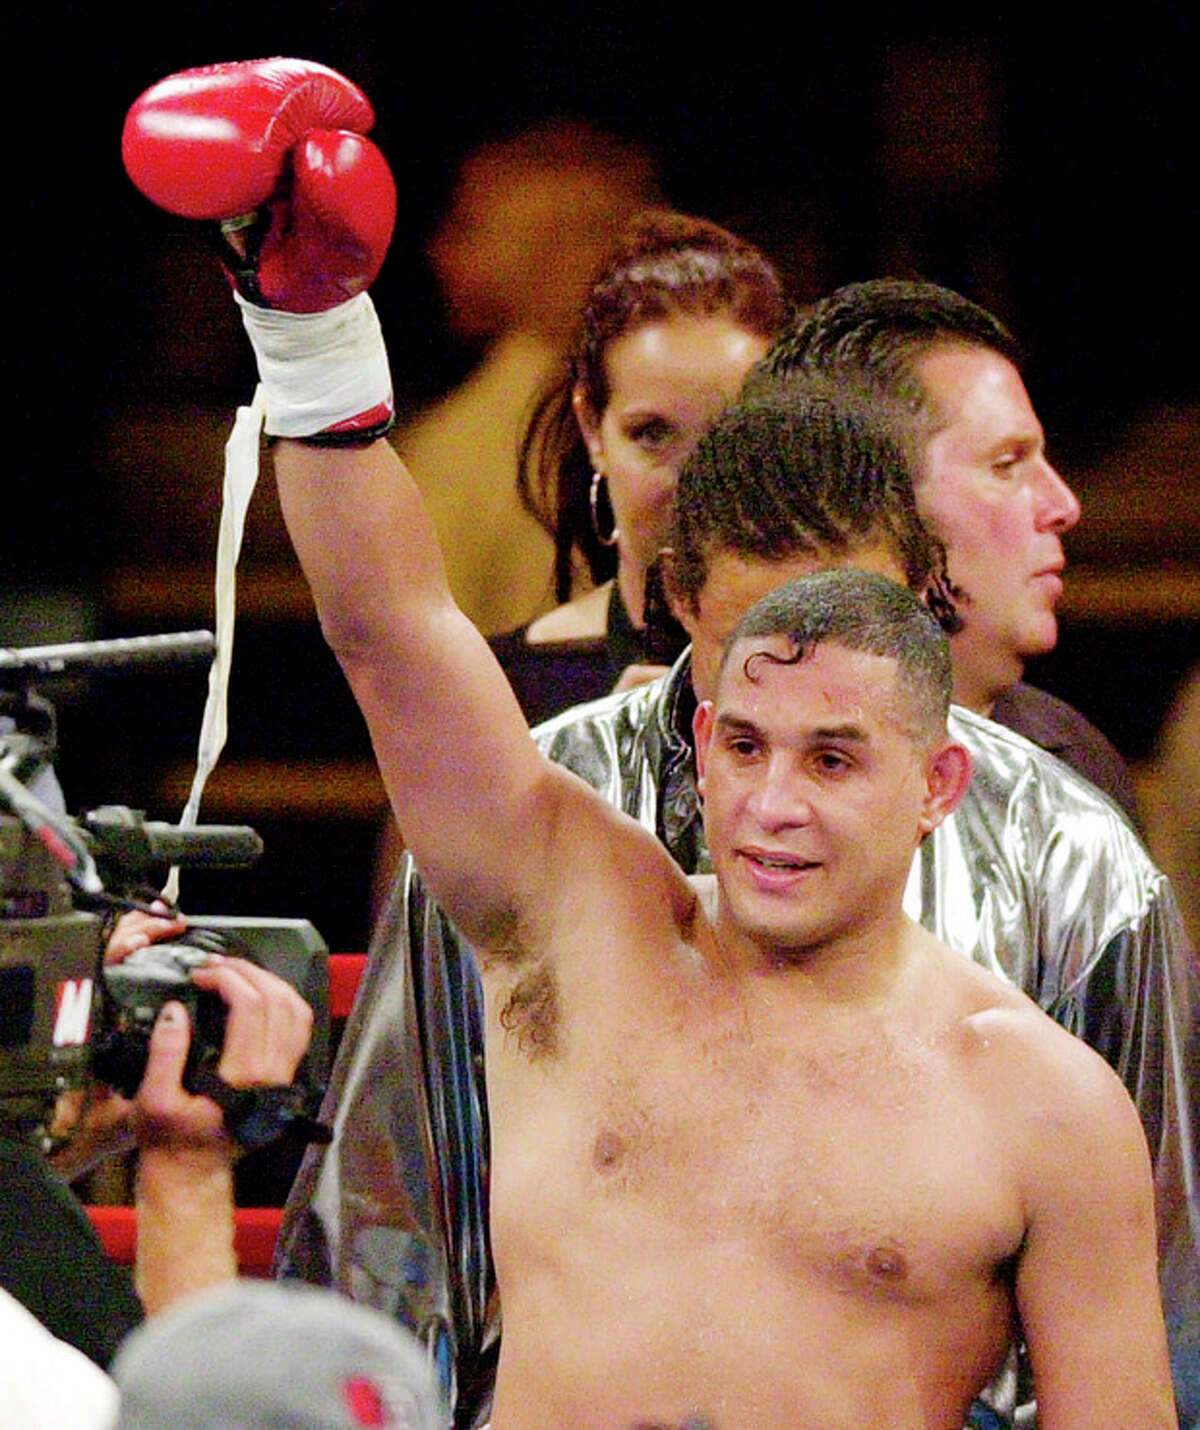 FILE - In this July 14, 2001 file photo, boxing champ Hector "Macho" Camacho celebrates after defeating Roberto Duran in their super middleweight National Boxing Association championship fight in Denver. Camacho, a boxer known for skill and flamboyance in the ring, as well as for a messy personal life and run-ins with the police, has died, Saturday, Nov. 24, 2012, after being taken off life support. He was 50. (AP Photo/Ed Andrieski, File)